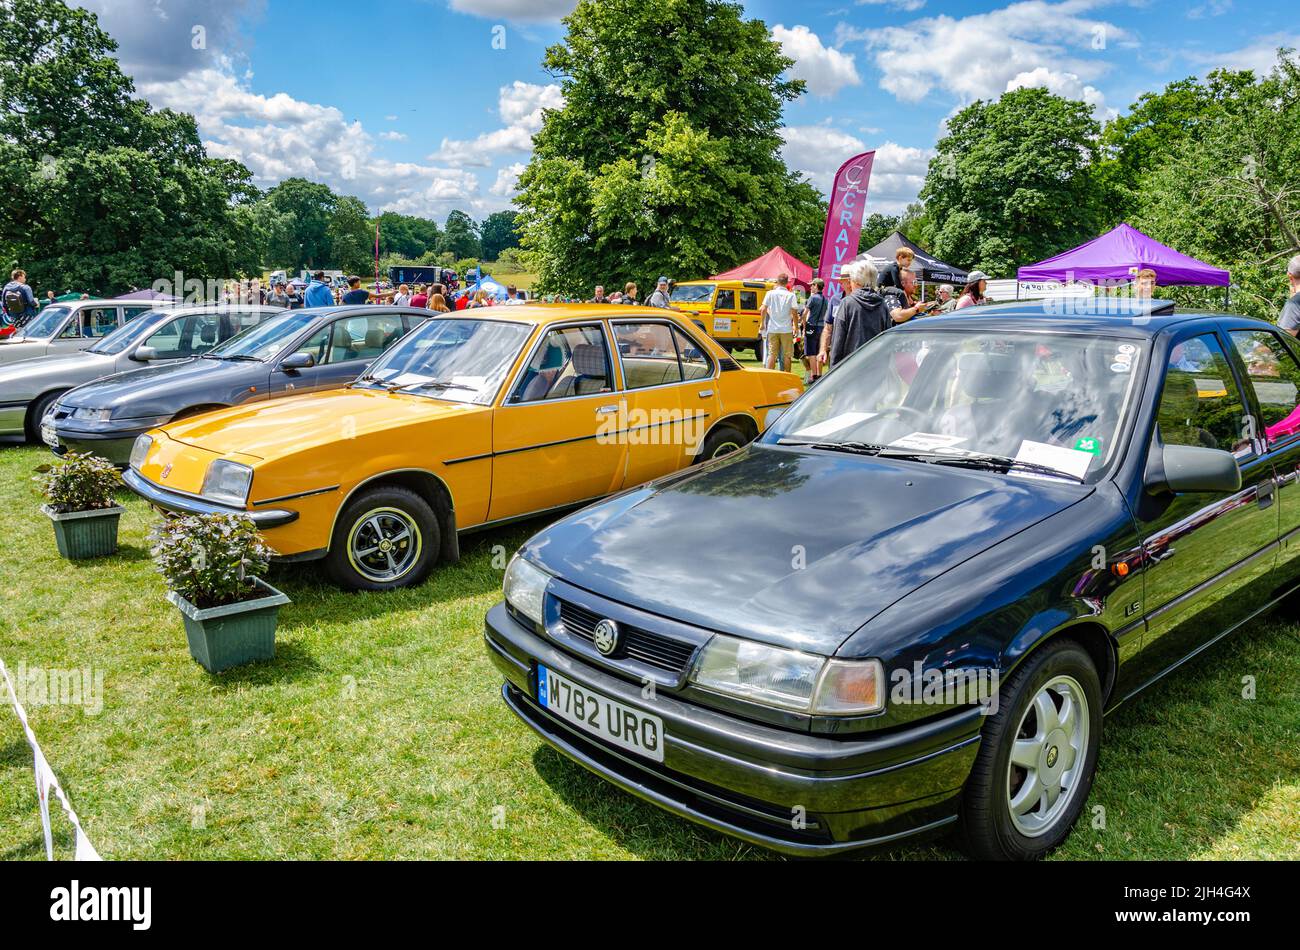 A Mark 3 Cavalier next to a Mark 1 Cavalier at The Berkshire Motor Show in Reading, UK Stock Photo